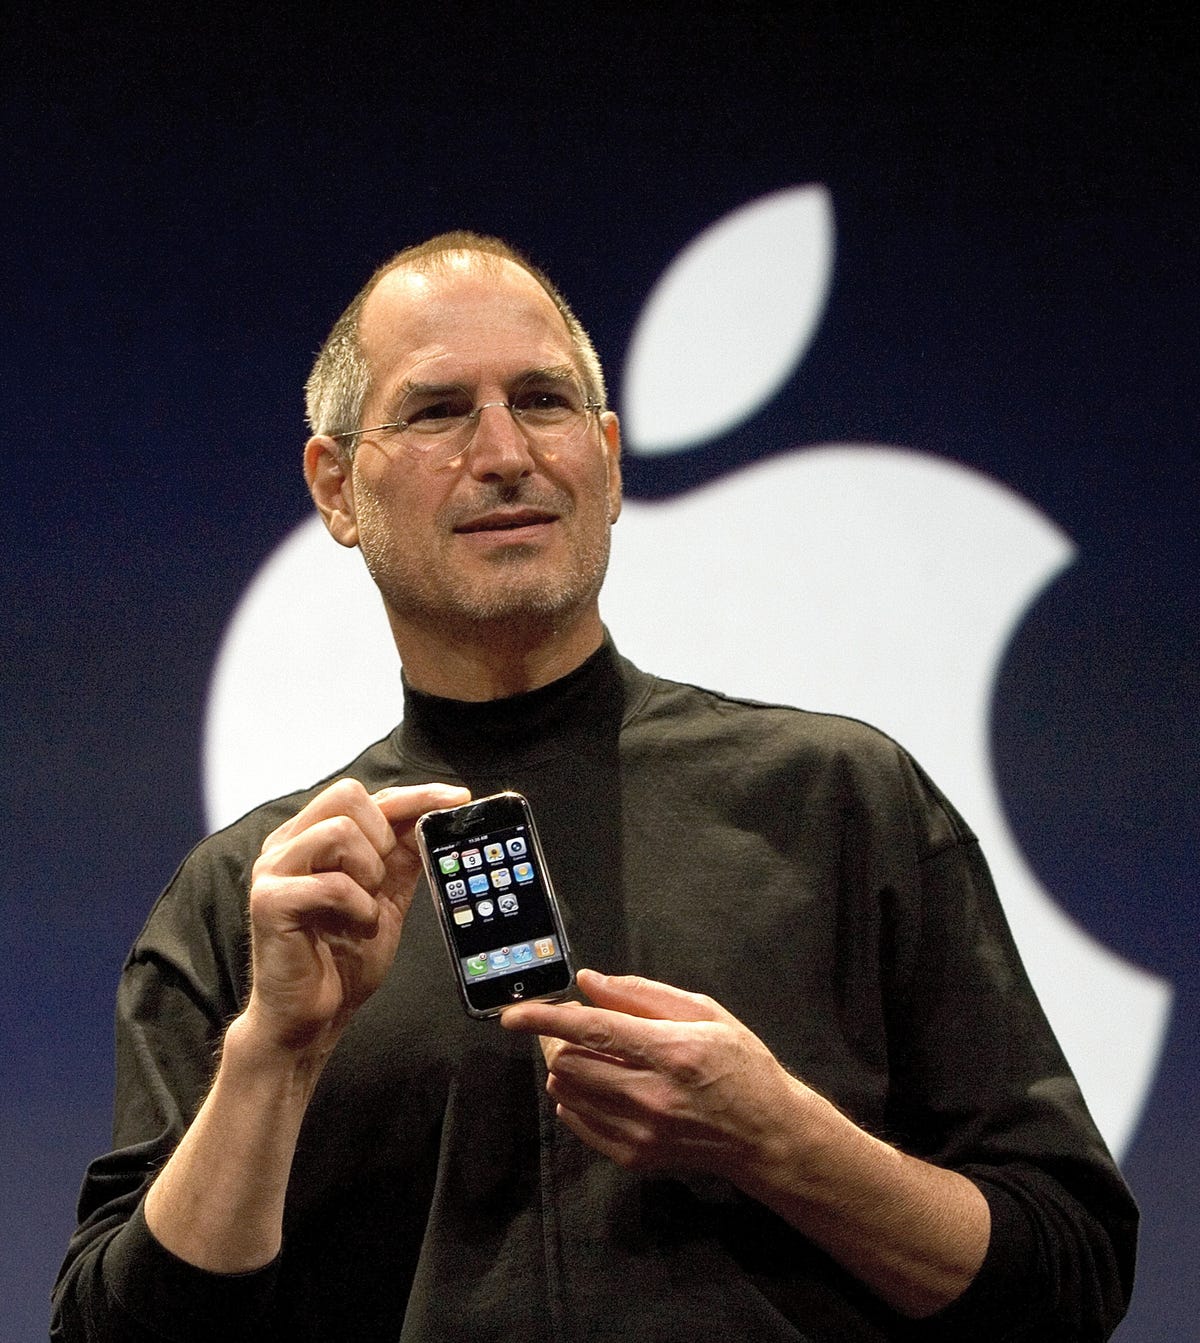 Steve Jobs in a black mock turtleneck in 2007, introducing the first iPhone, which he's holding in his hands